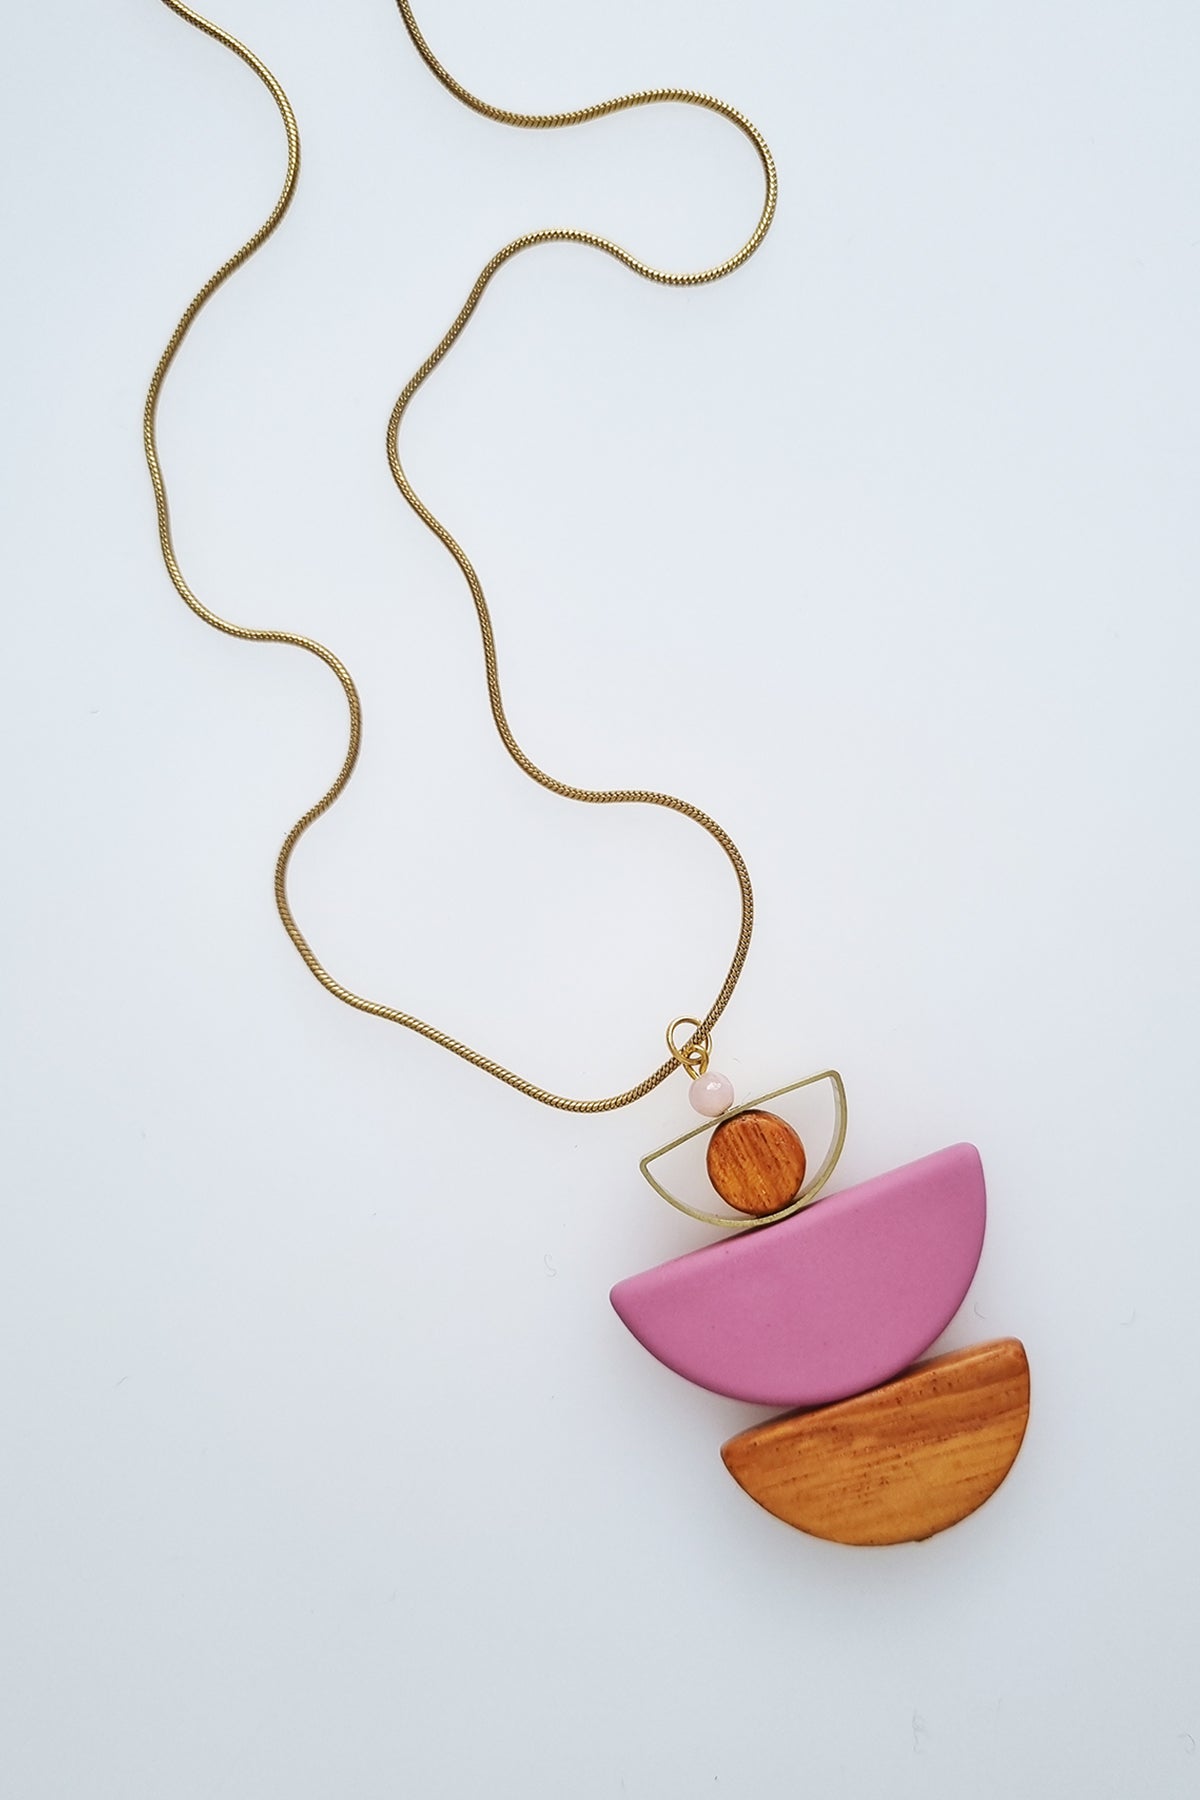 A necklace with a gold chain sits against a white background. It features a small wooden bead, followed by a brass D shape with a wooden circle bead enclosed, followed by a pink D shaped bead, and a wooden D shape bead.